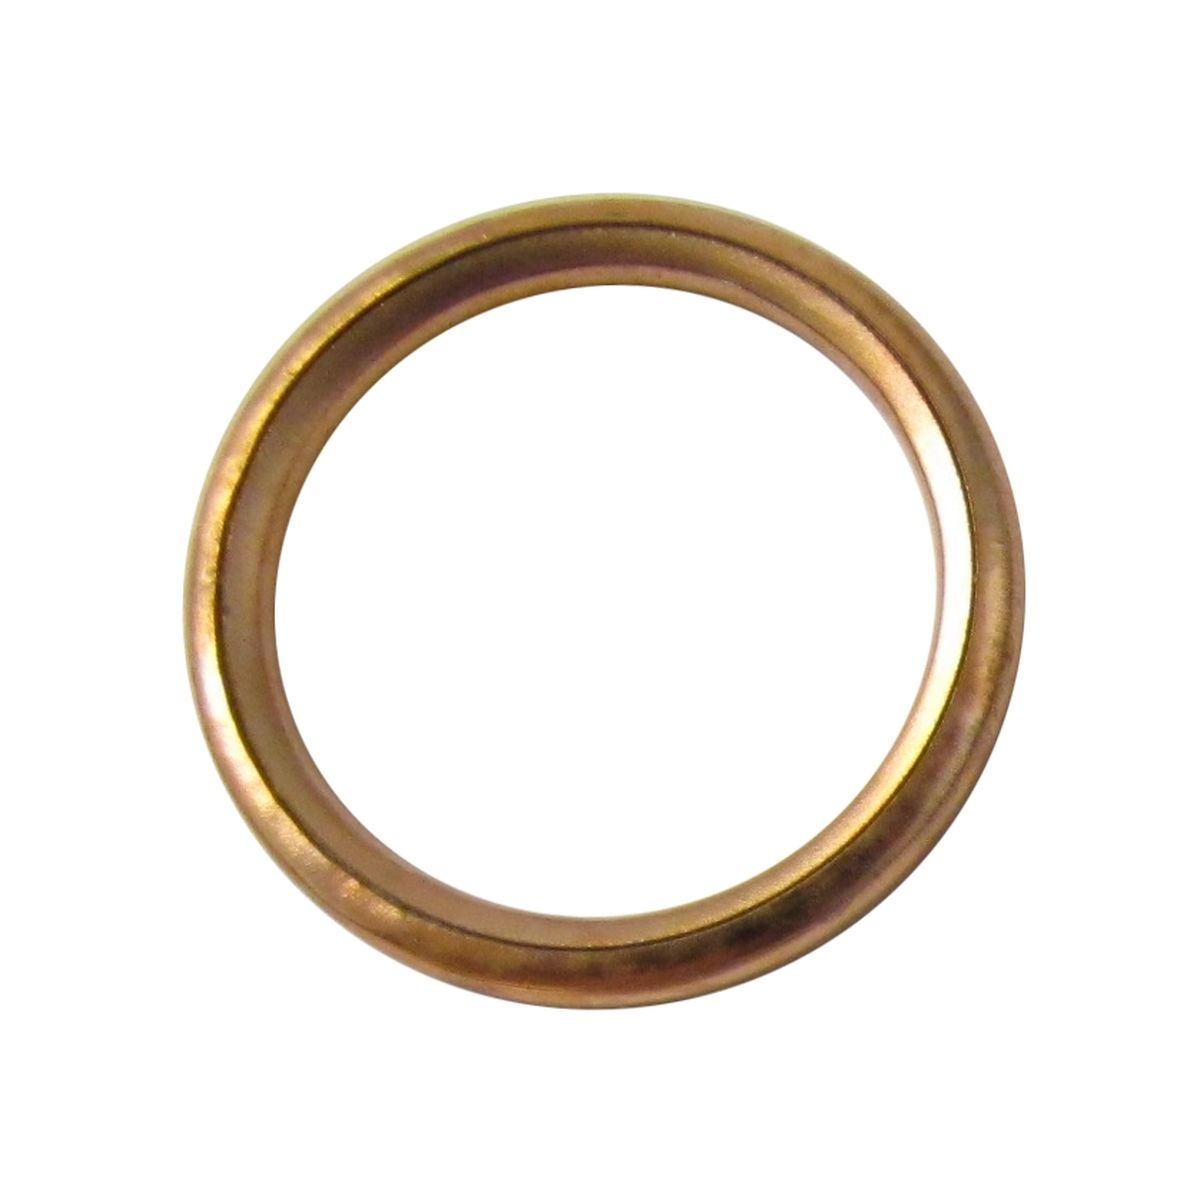 Exhaust Gasket Copper 1 New sales for 50 2009 Hurricane Keeway Super beauty product restock quality top